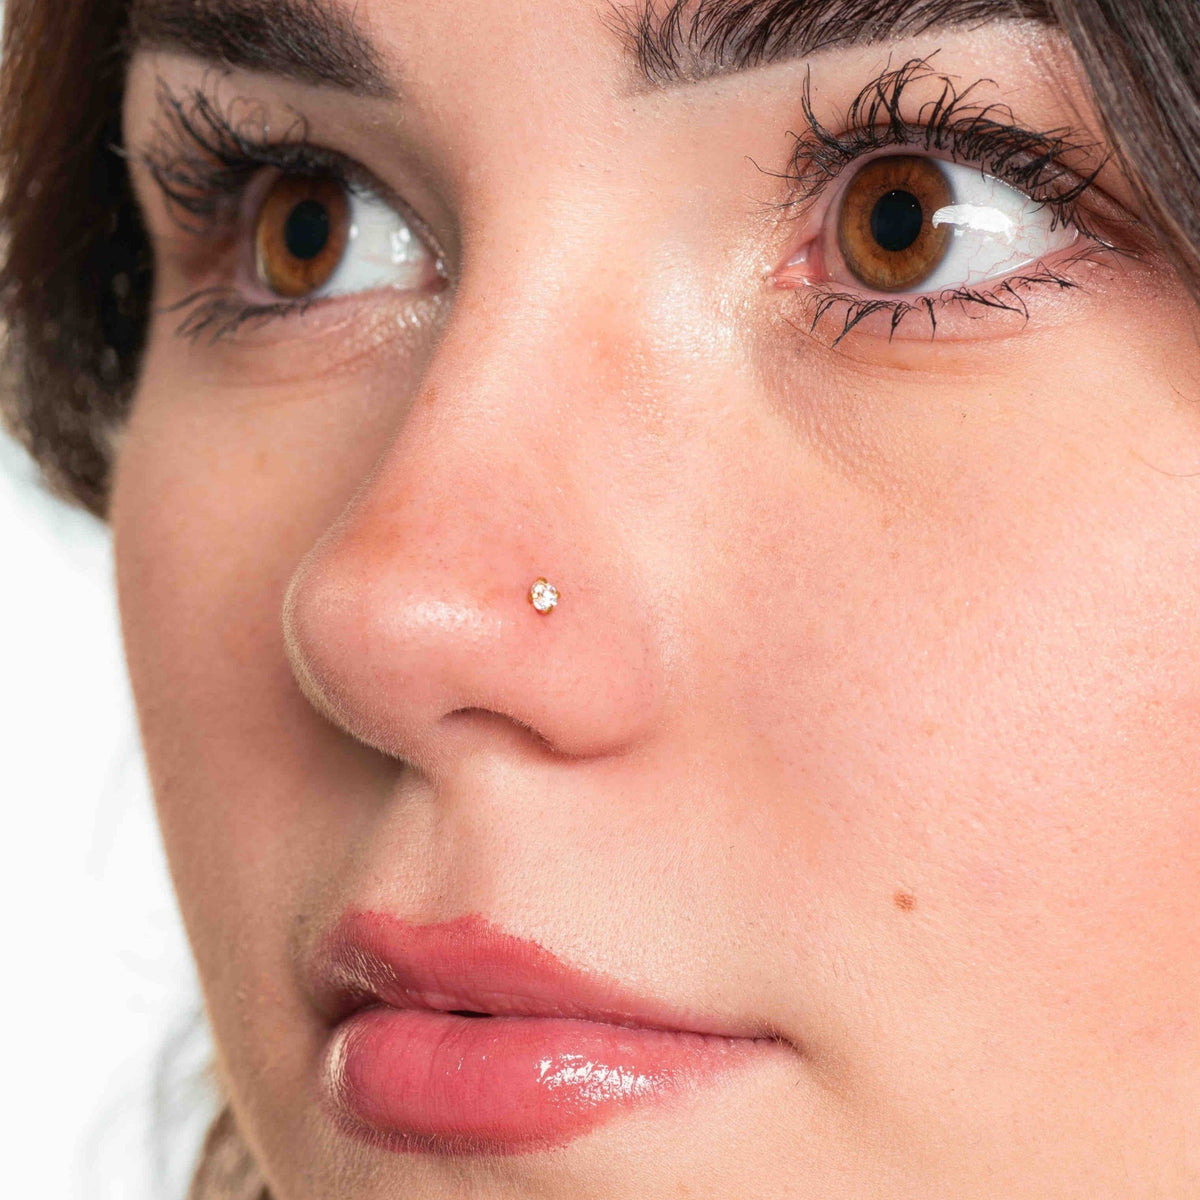 The diamond nose piercing - stainless steel 